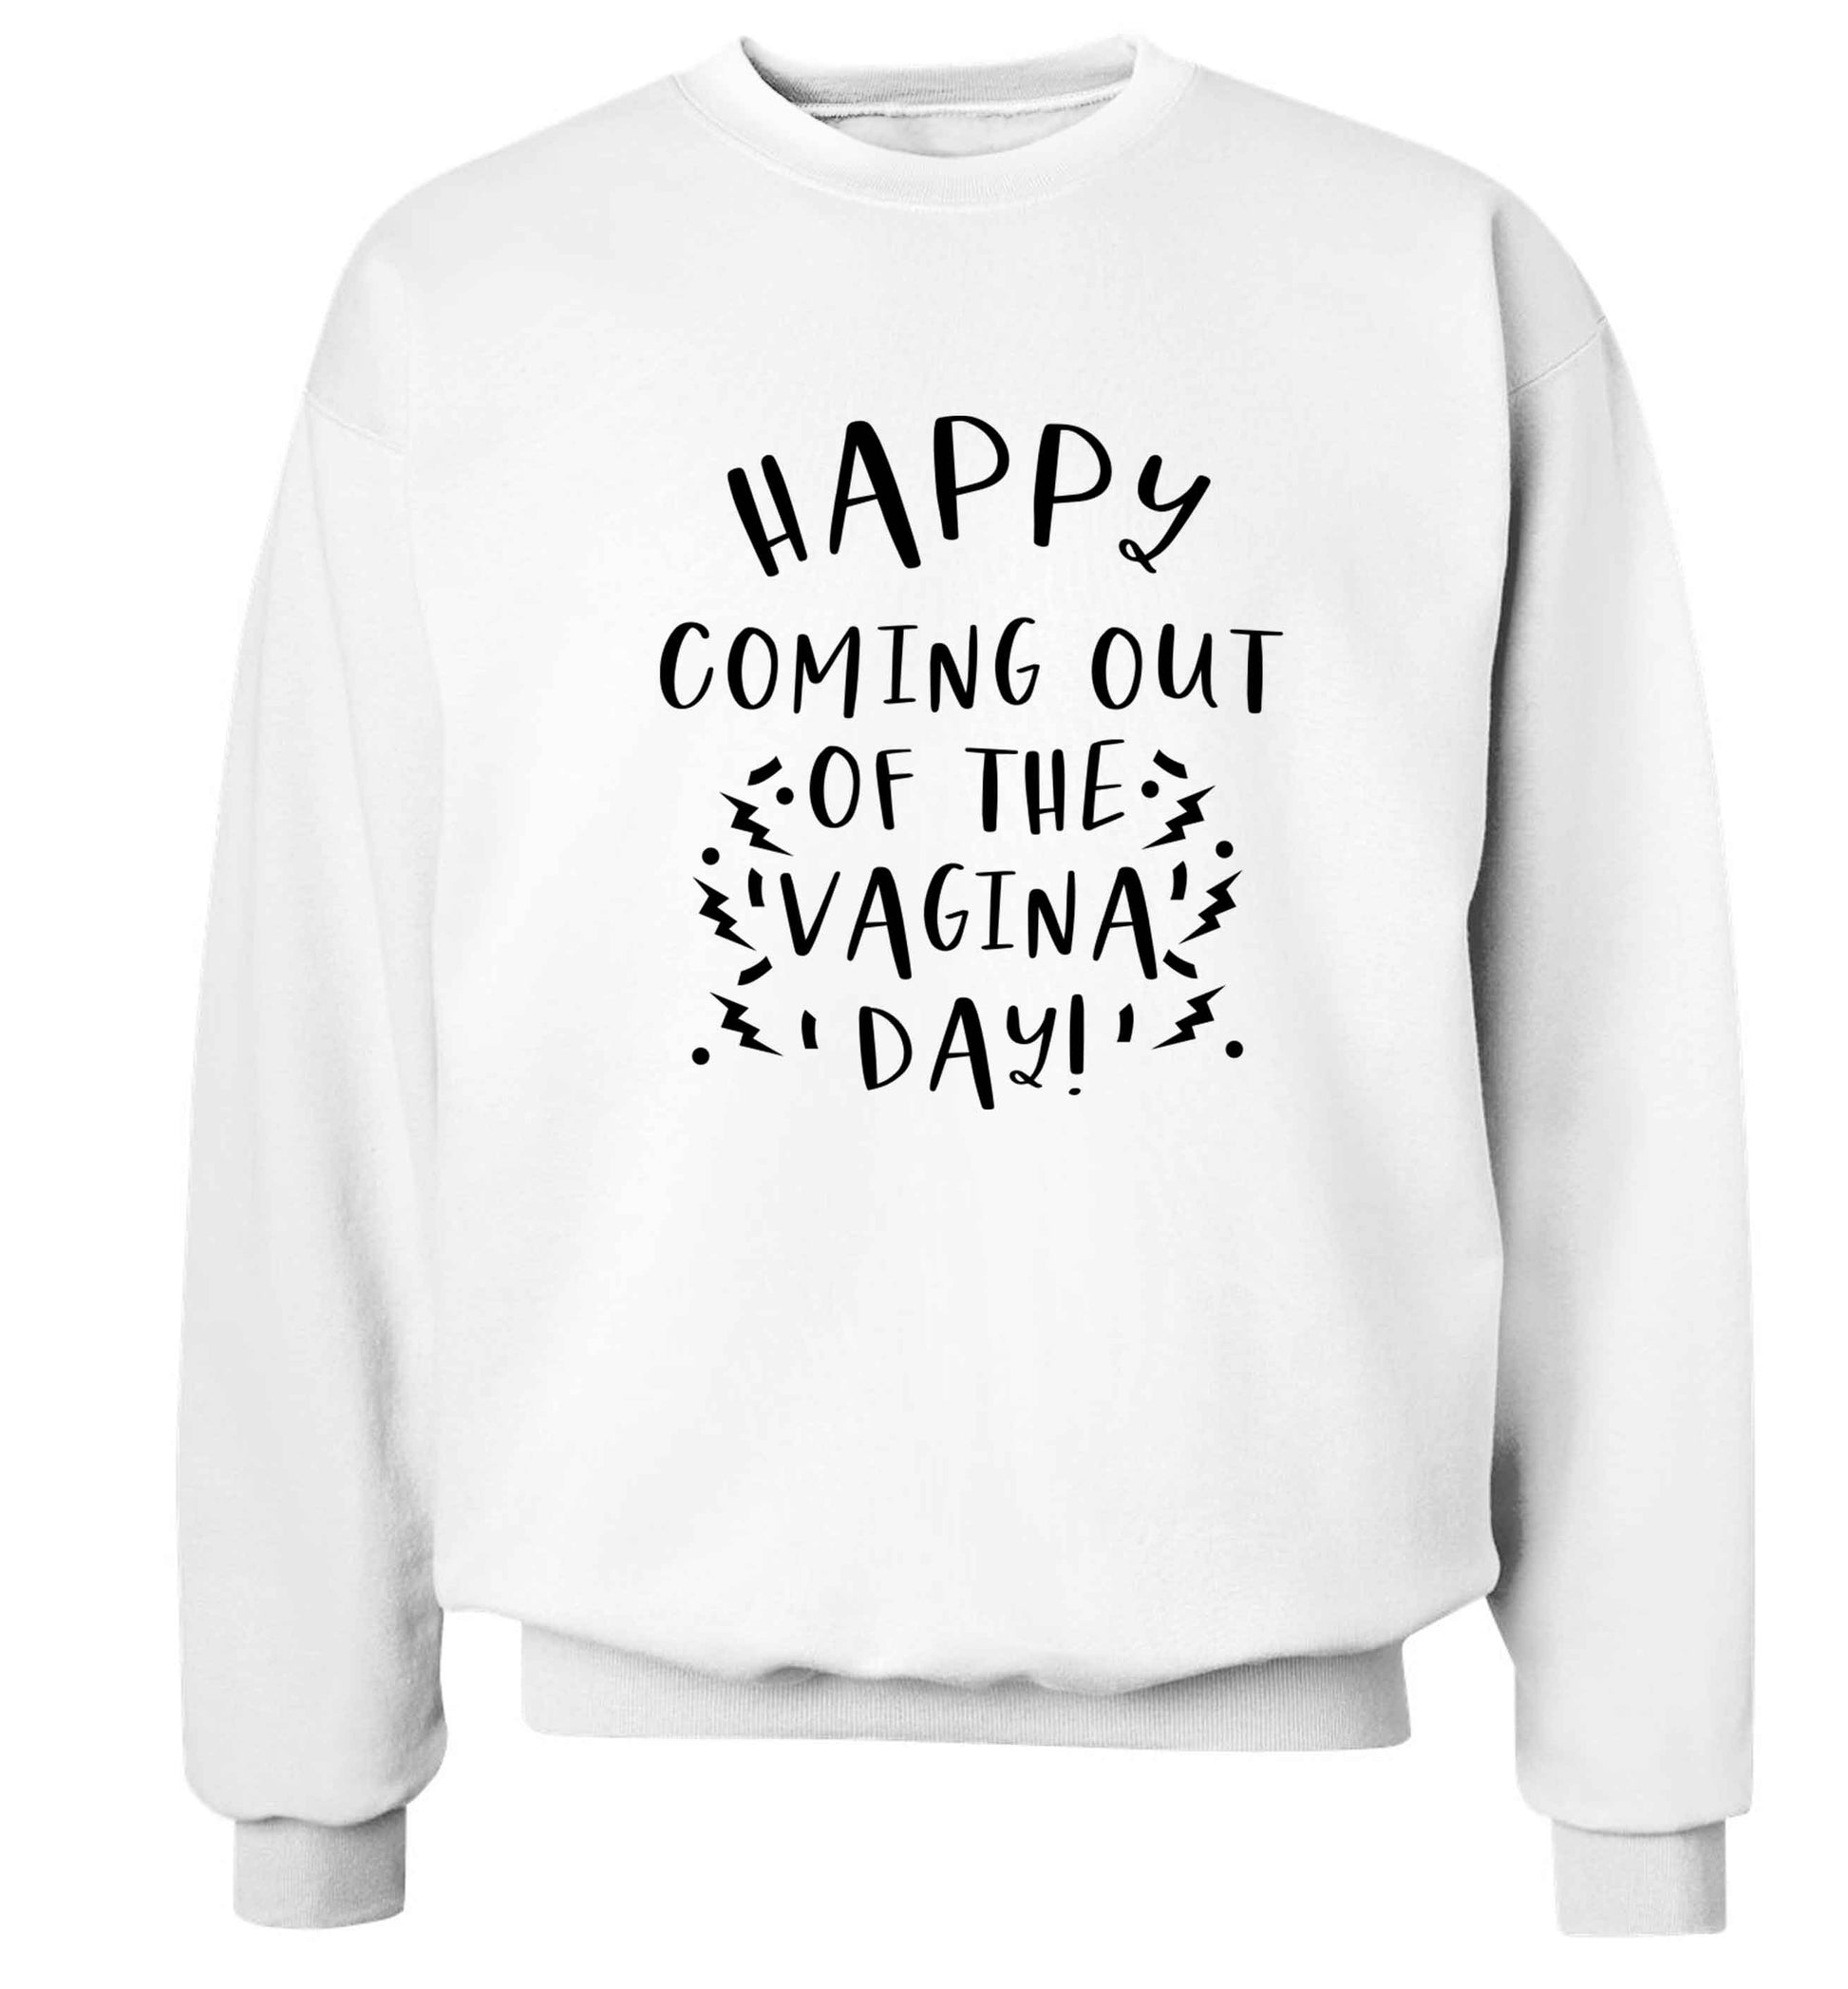 Happy coming out of the vagina day Adult's unisex white Sweater 2XL